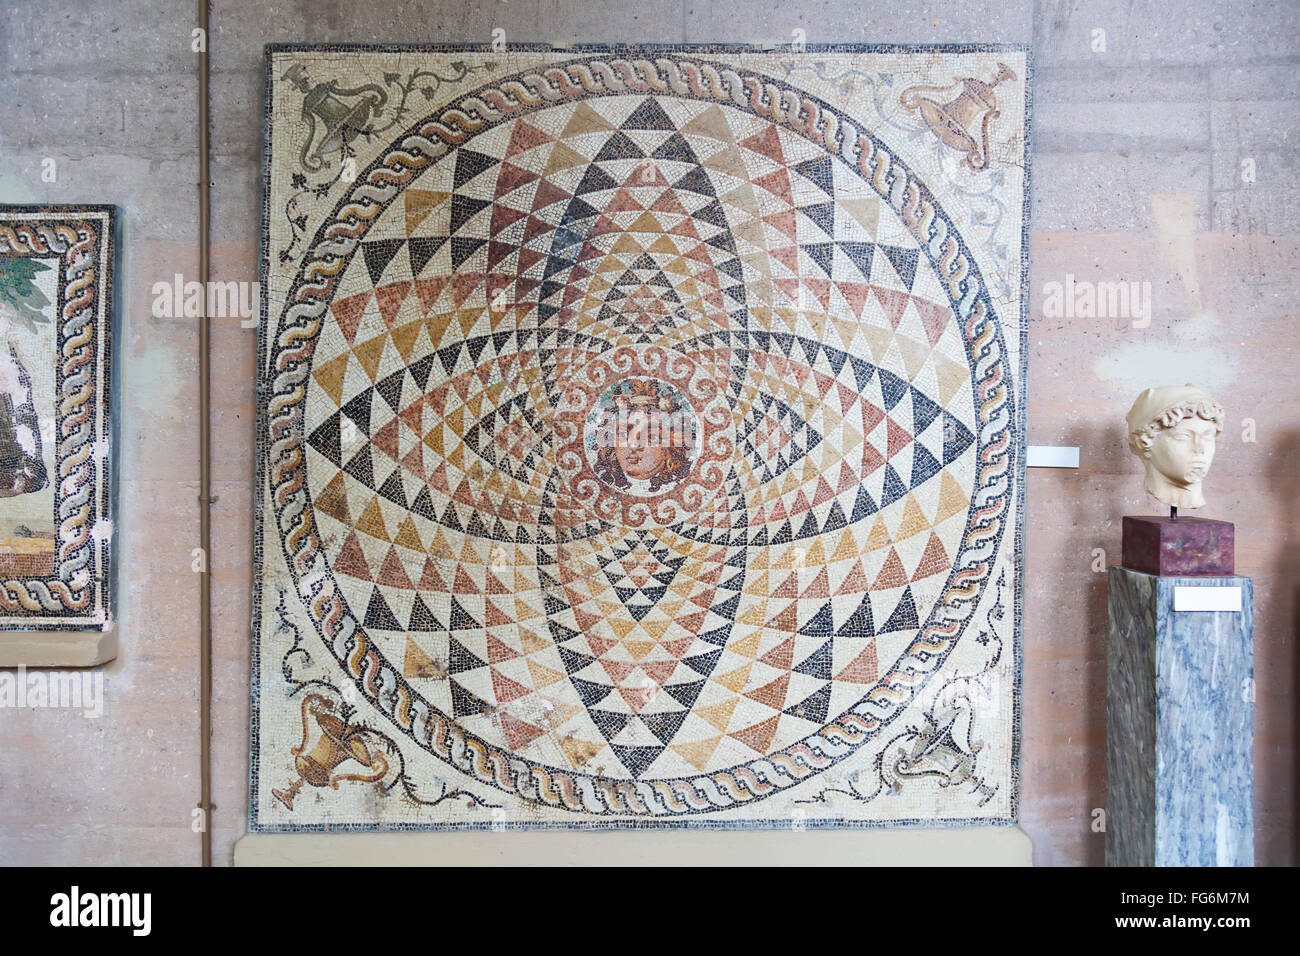 Tesselated floor on display in archaeological museum; Corinth, Greece Stock Photo